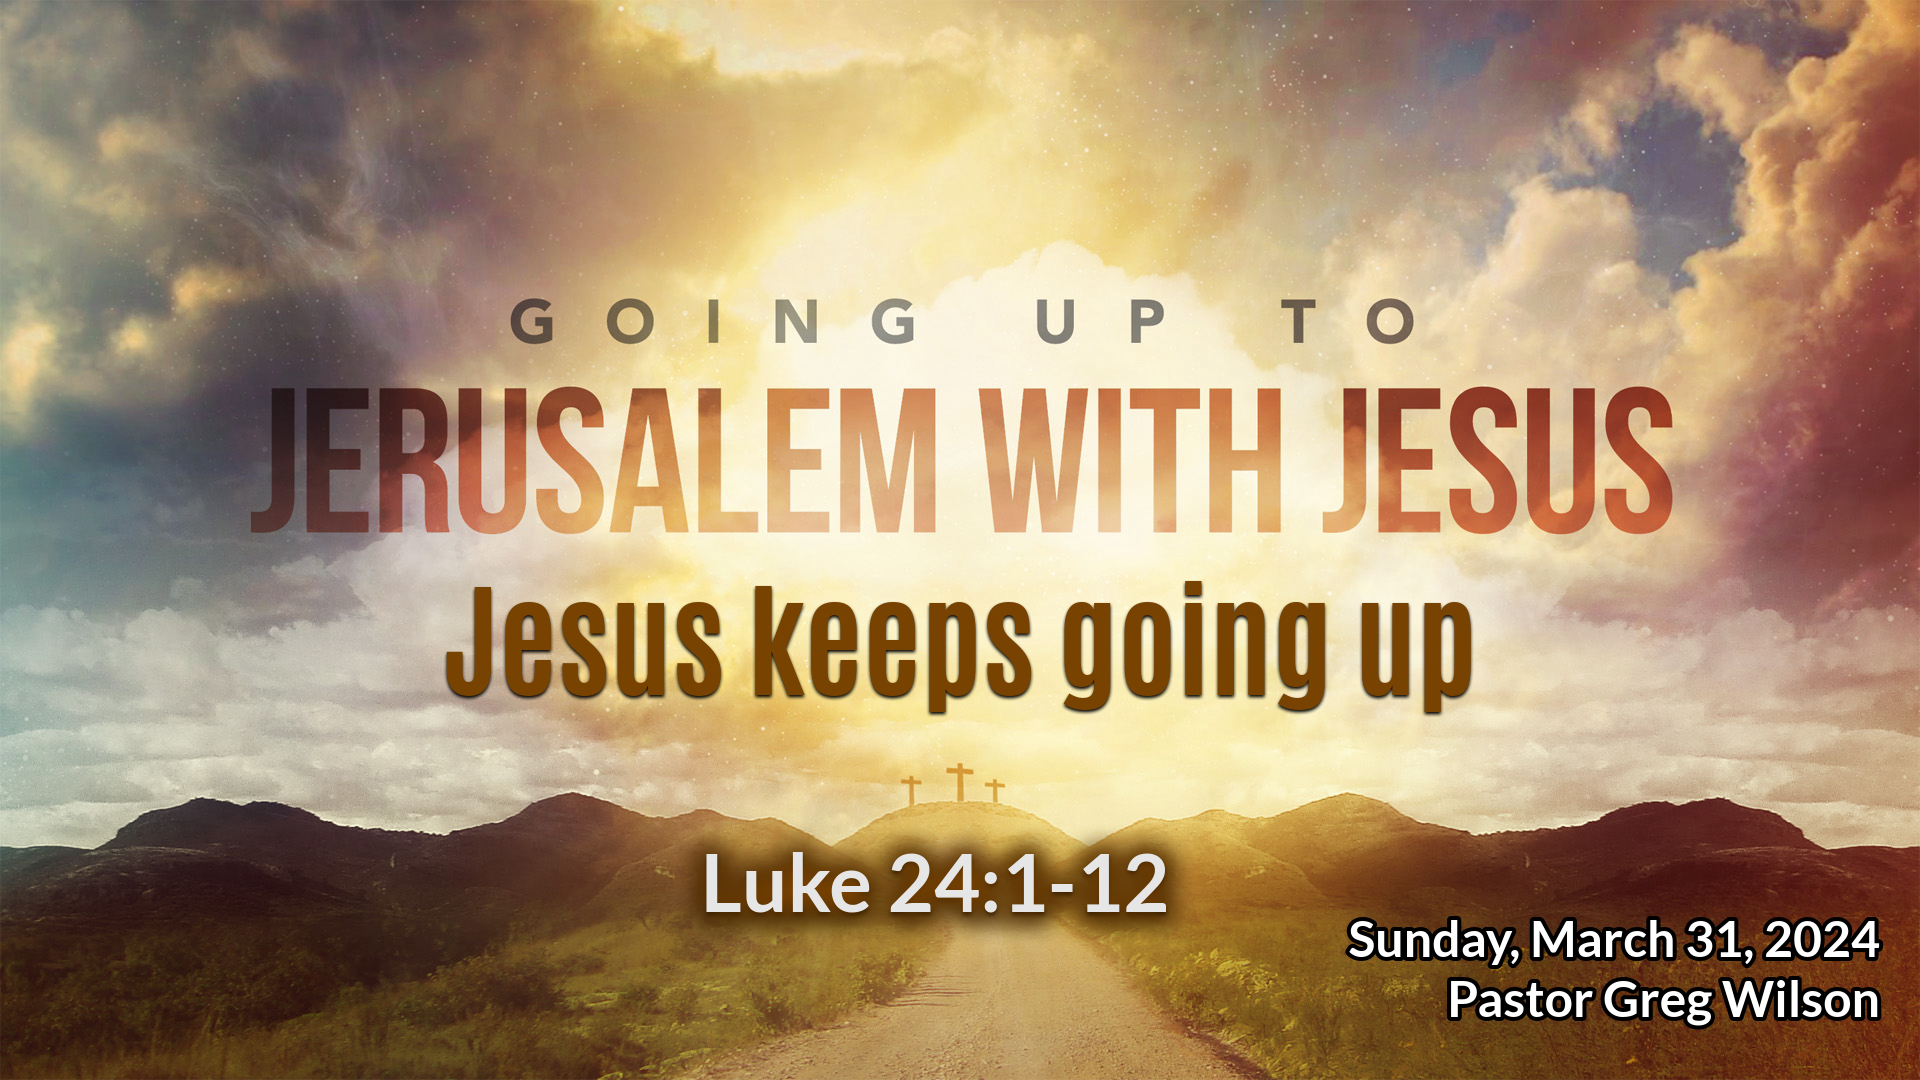 "Jesus keeps going up"